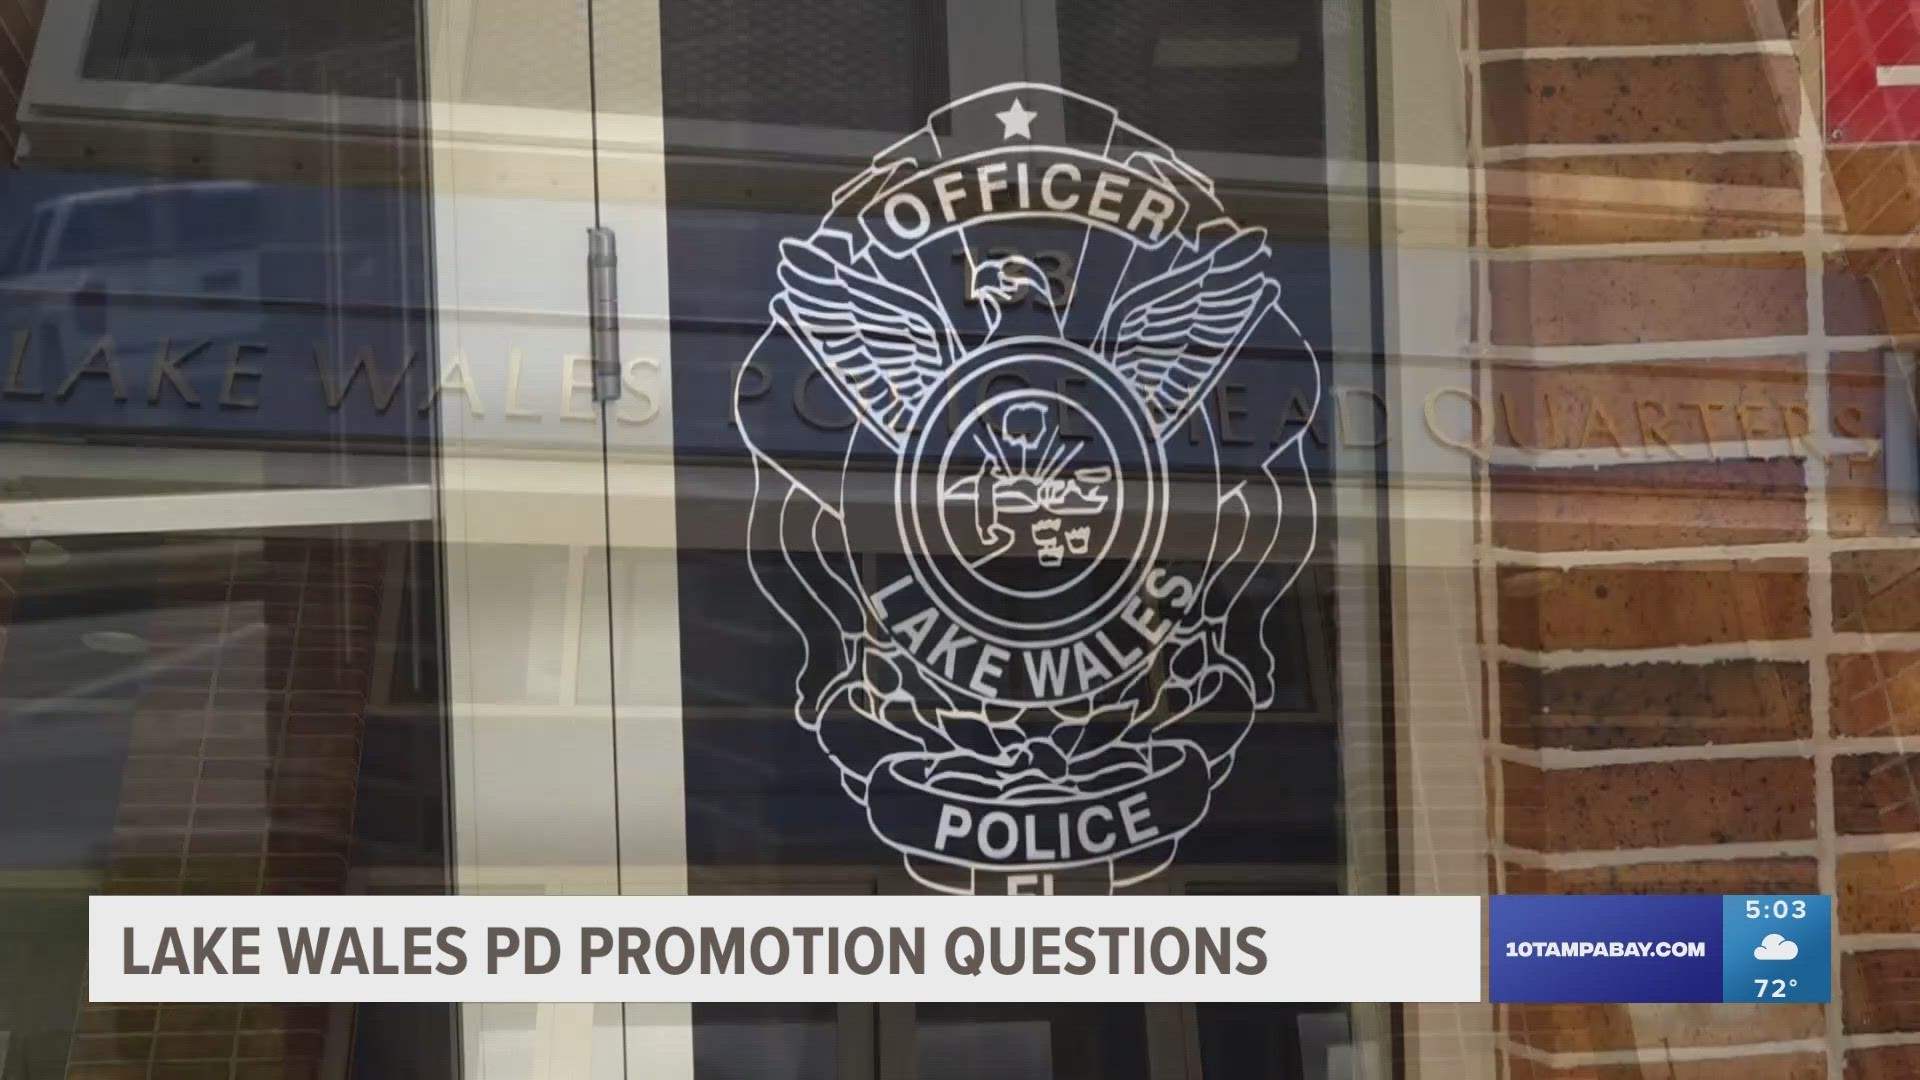 The organization accuses the police department of racism during a recent round of promotions.